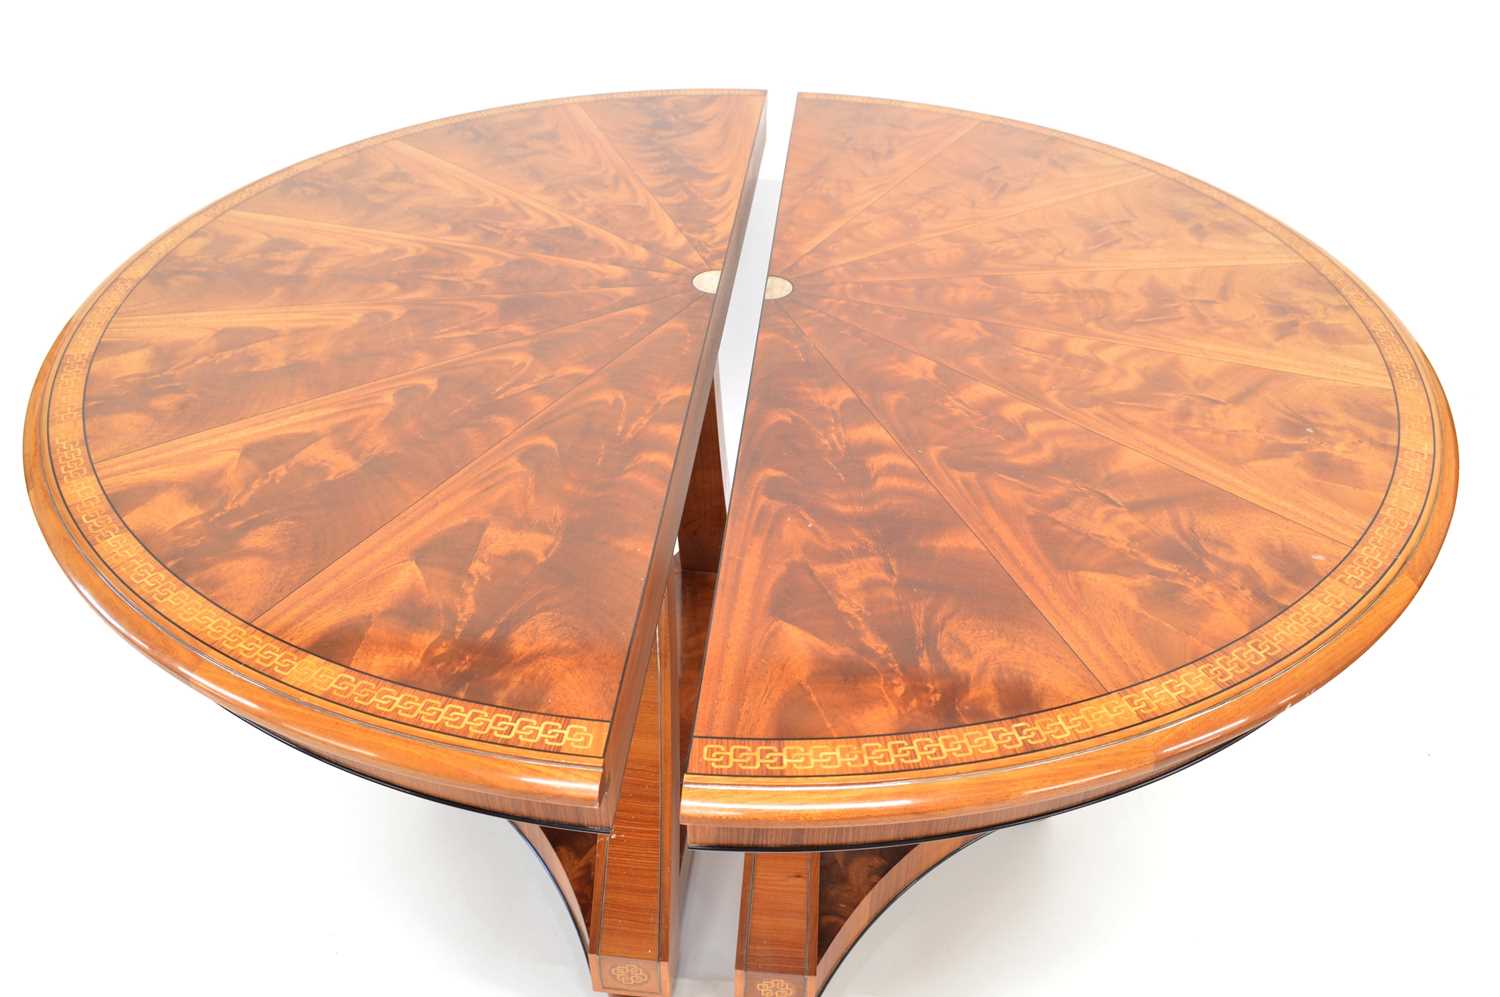 Pair of Mahogany side tables by Silver Linings workshop - Image 3 of 9